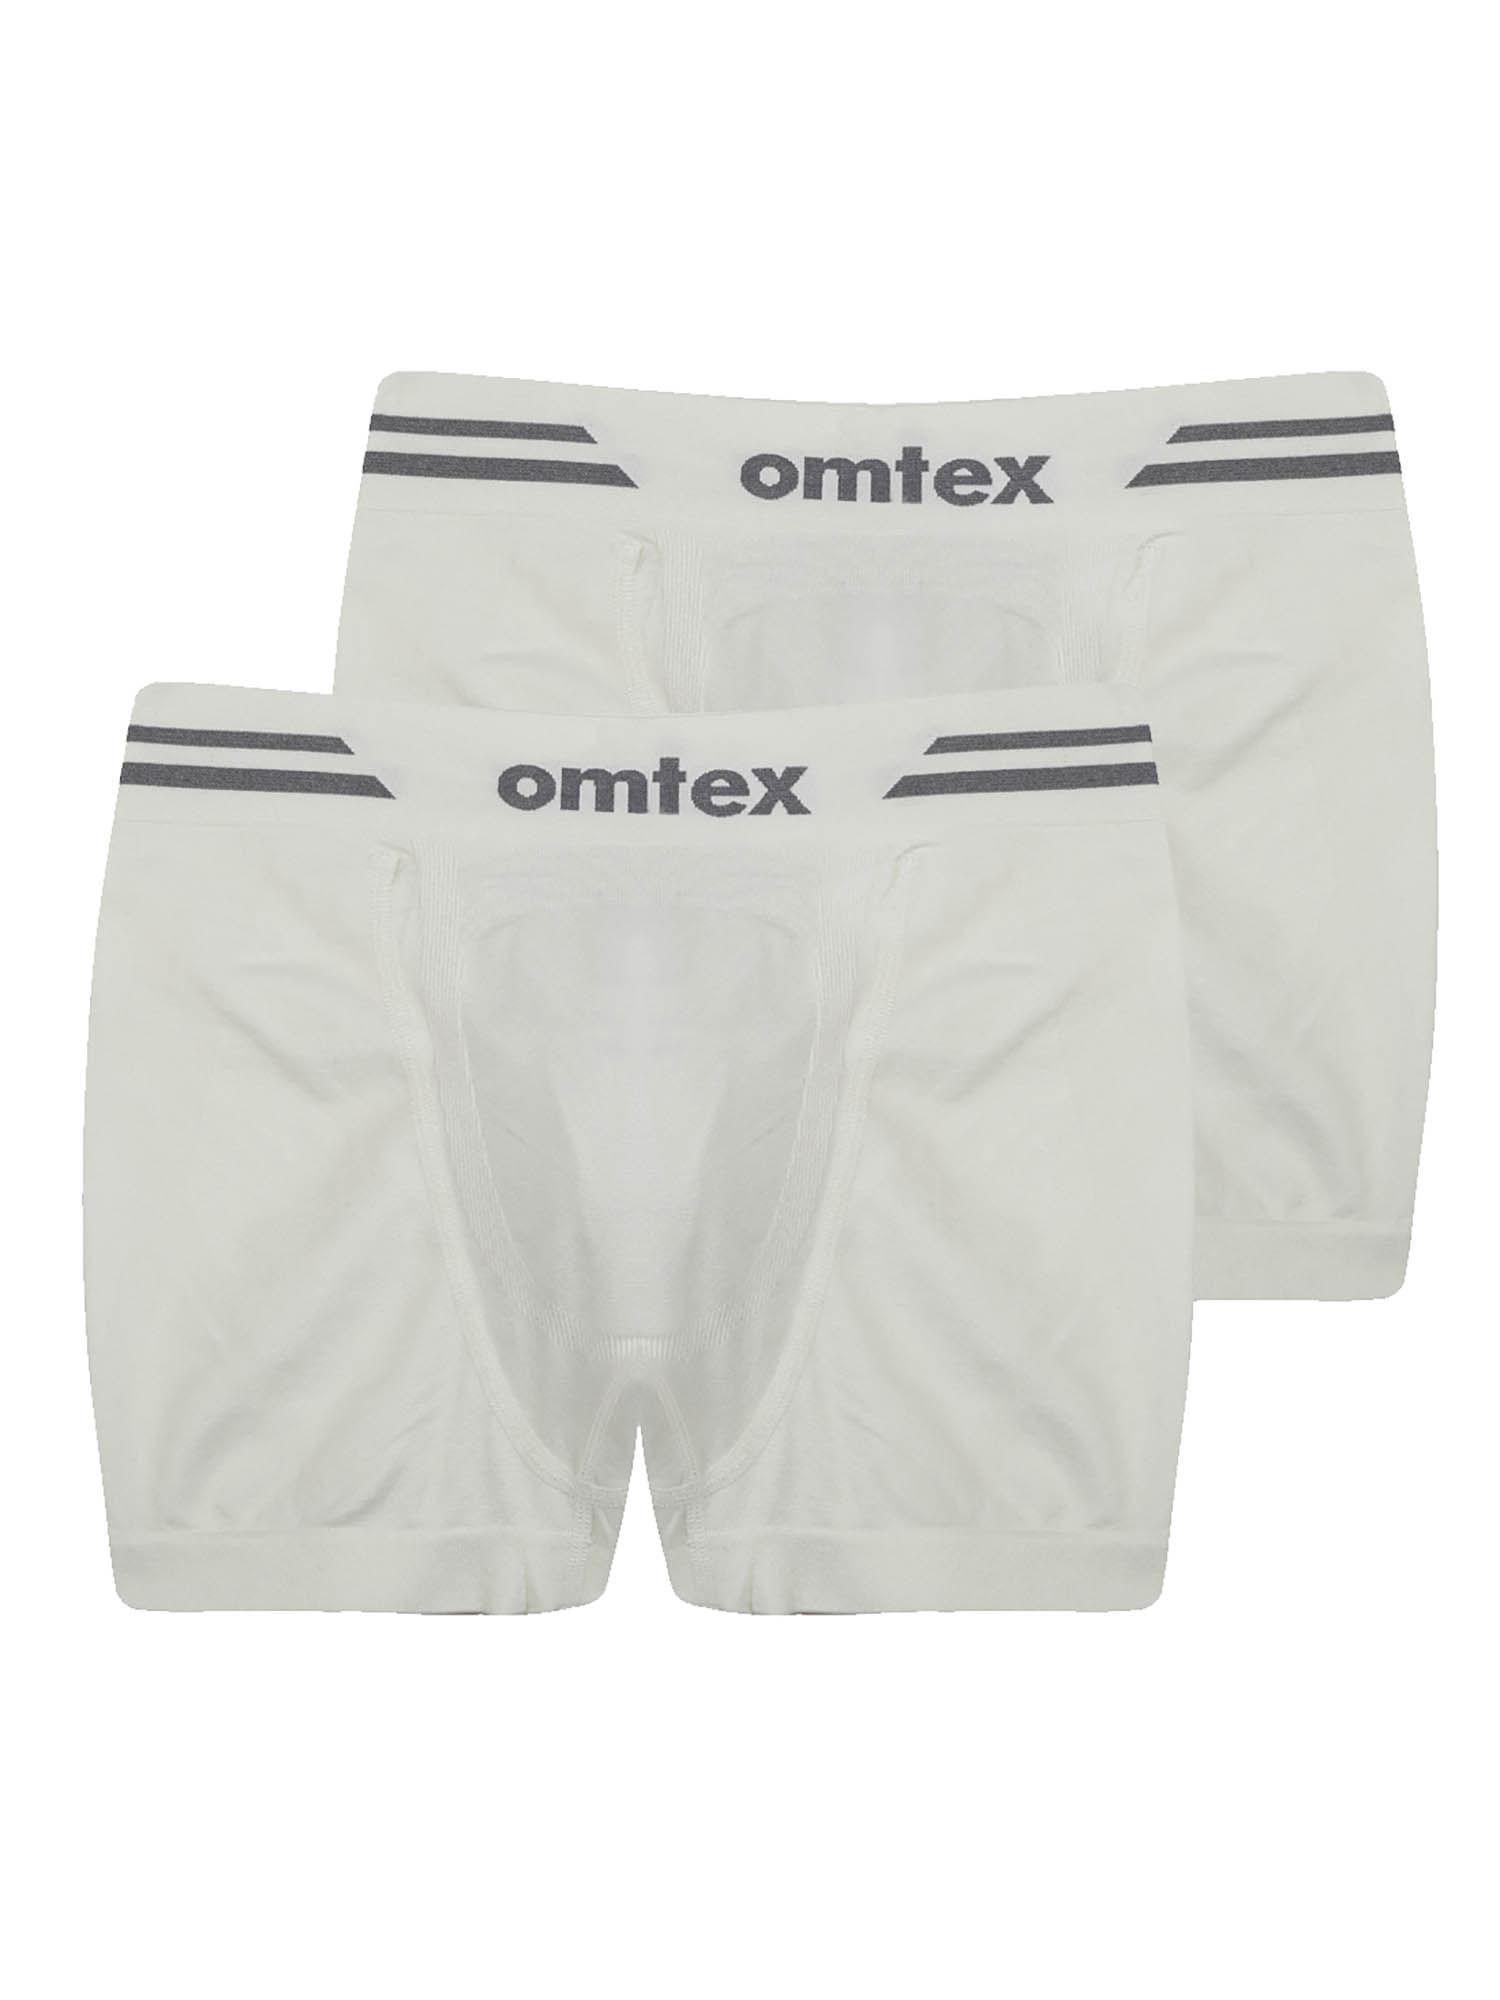 mens athletic seamless short stretchable trunks white (pack of 2)